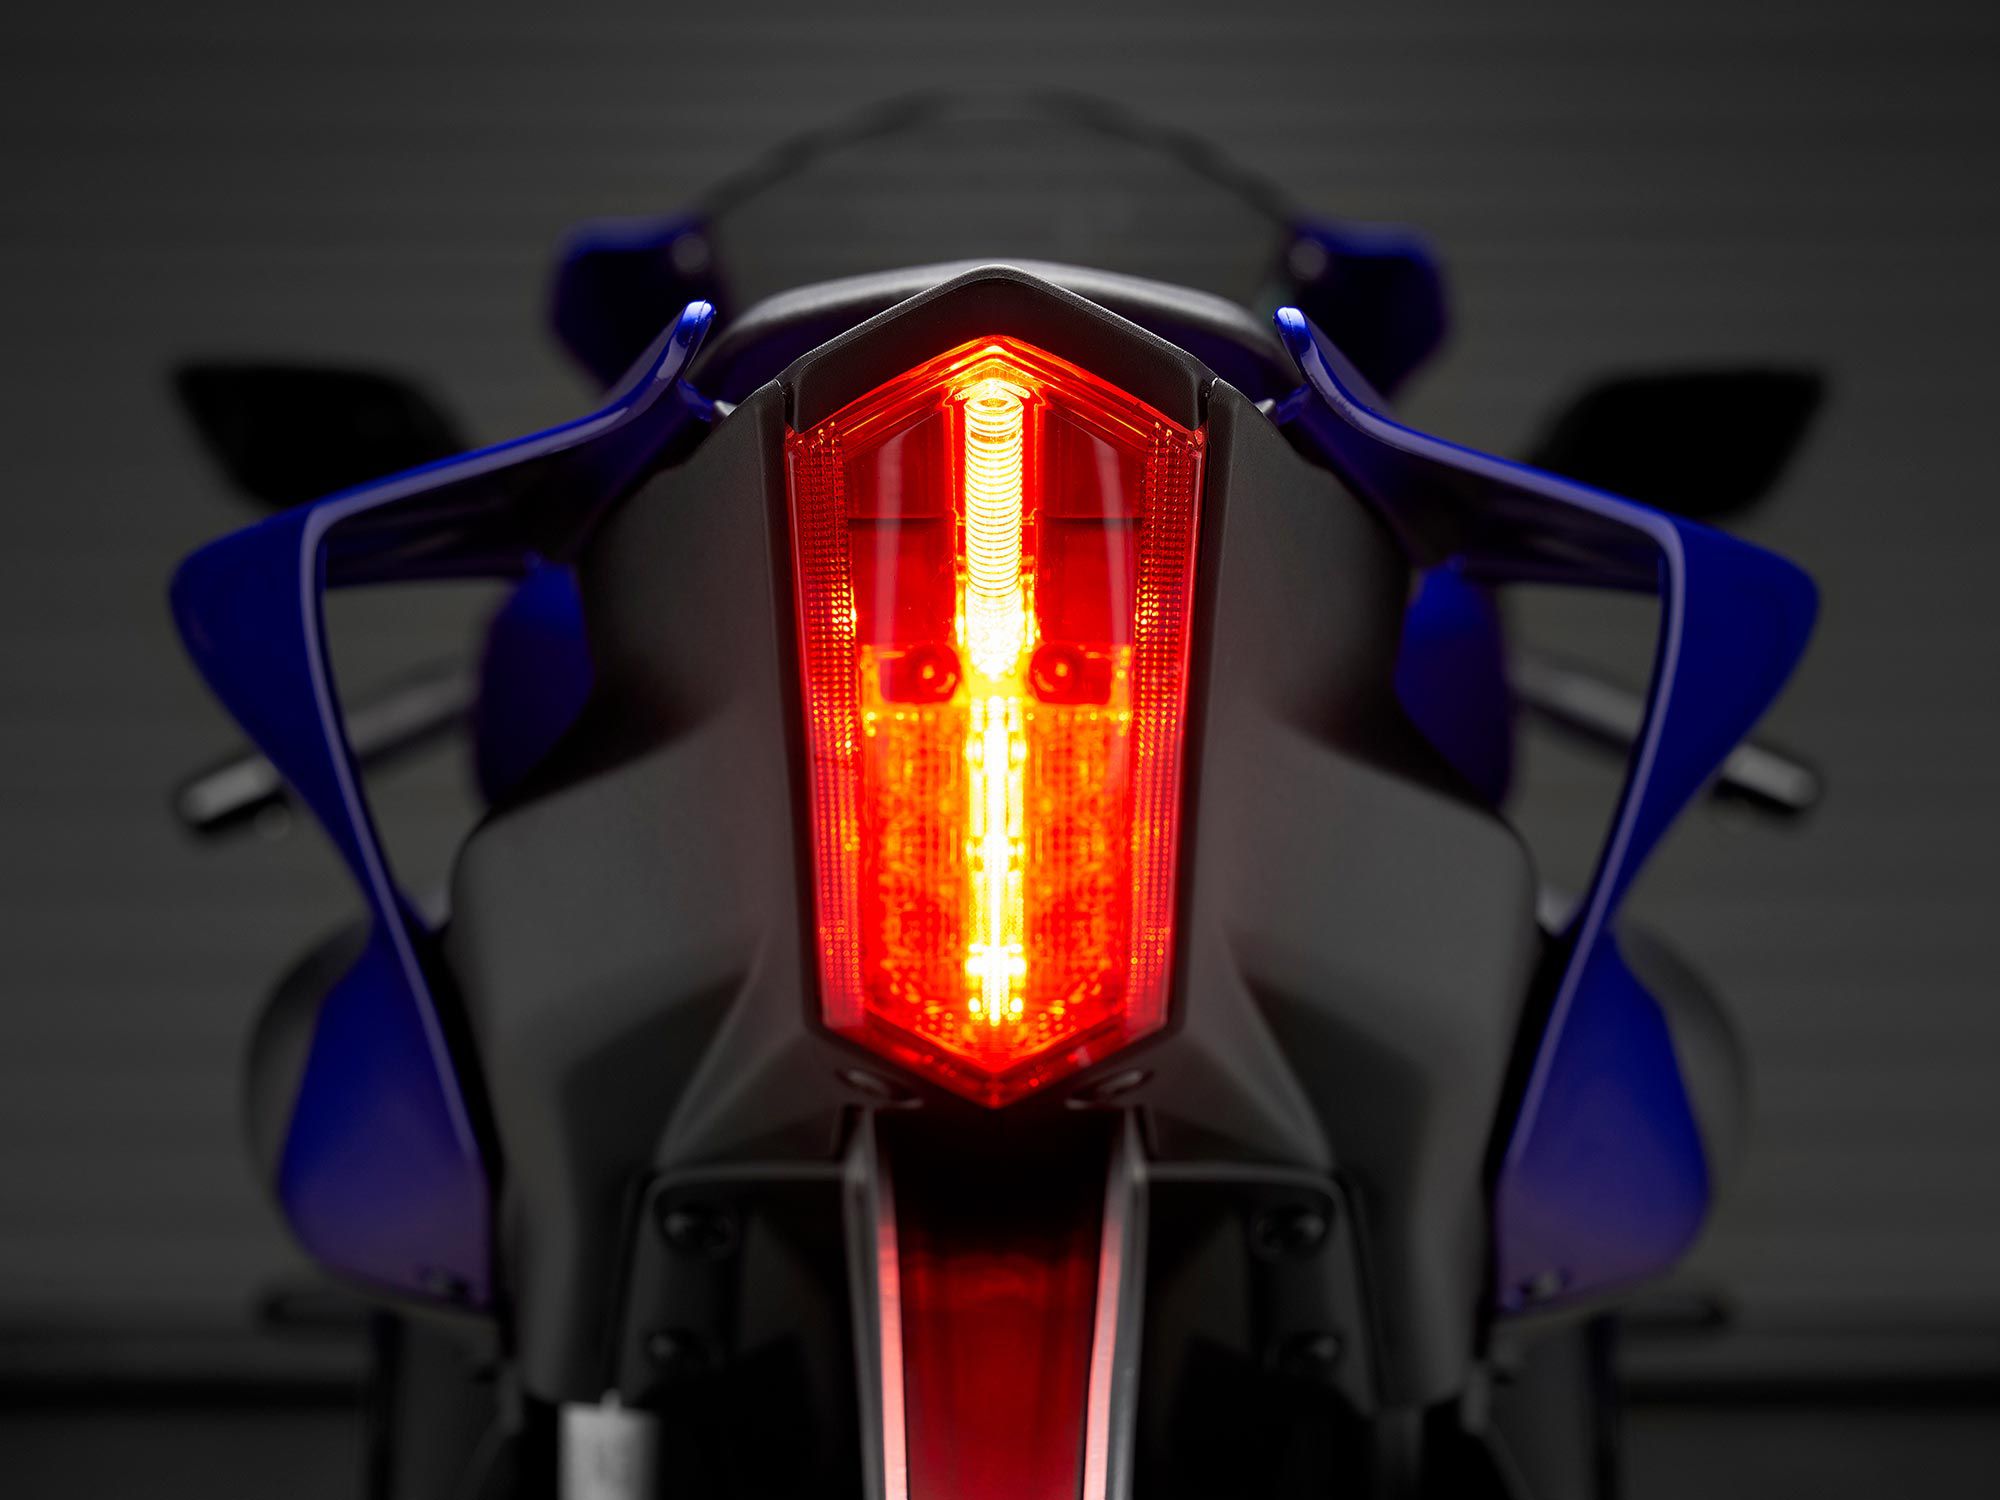 The YZF-R7 benefits from a full LED light package.